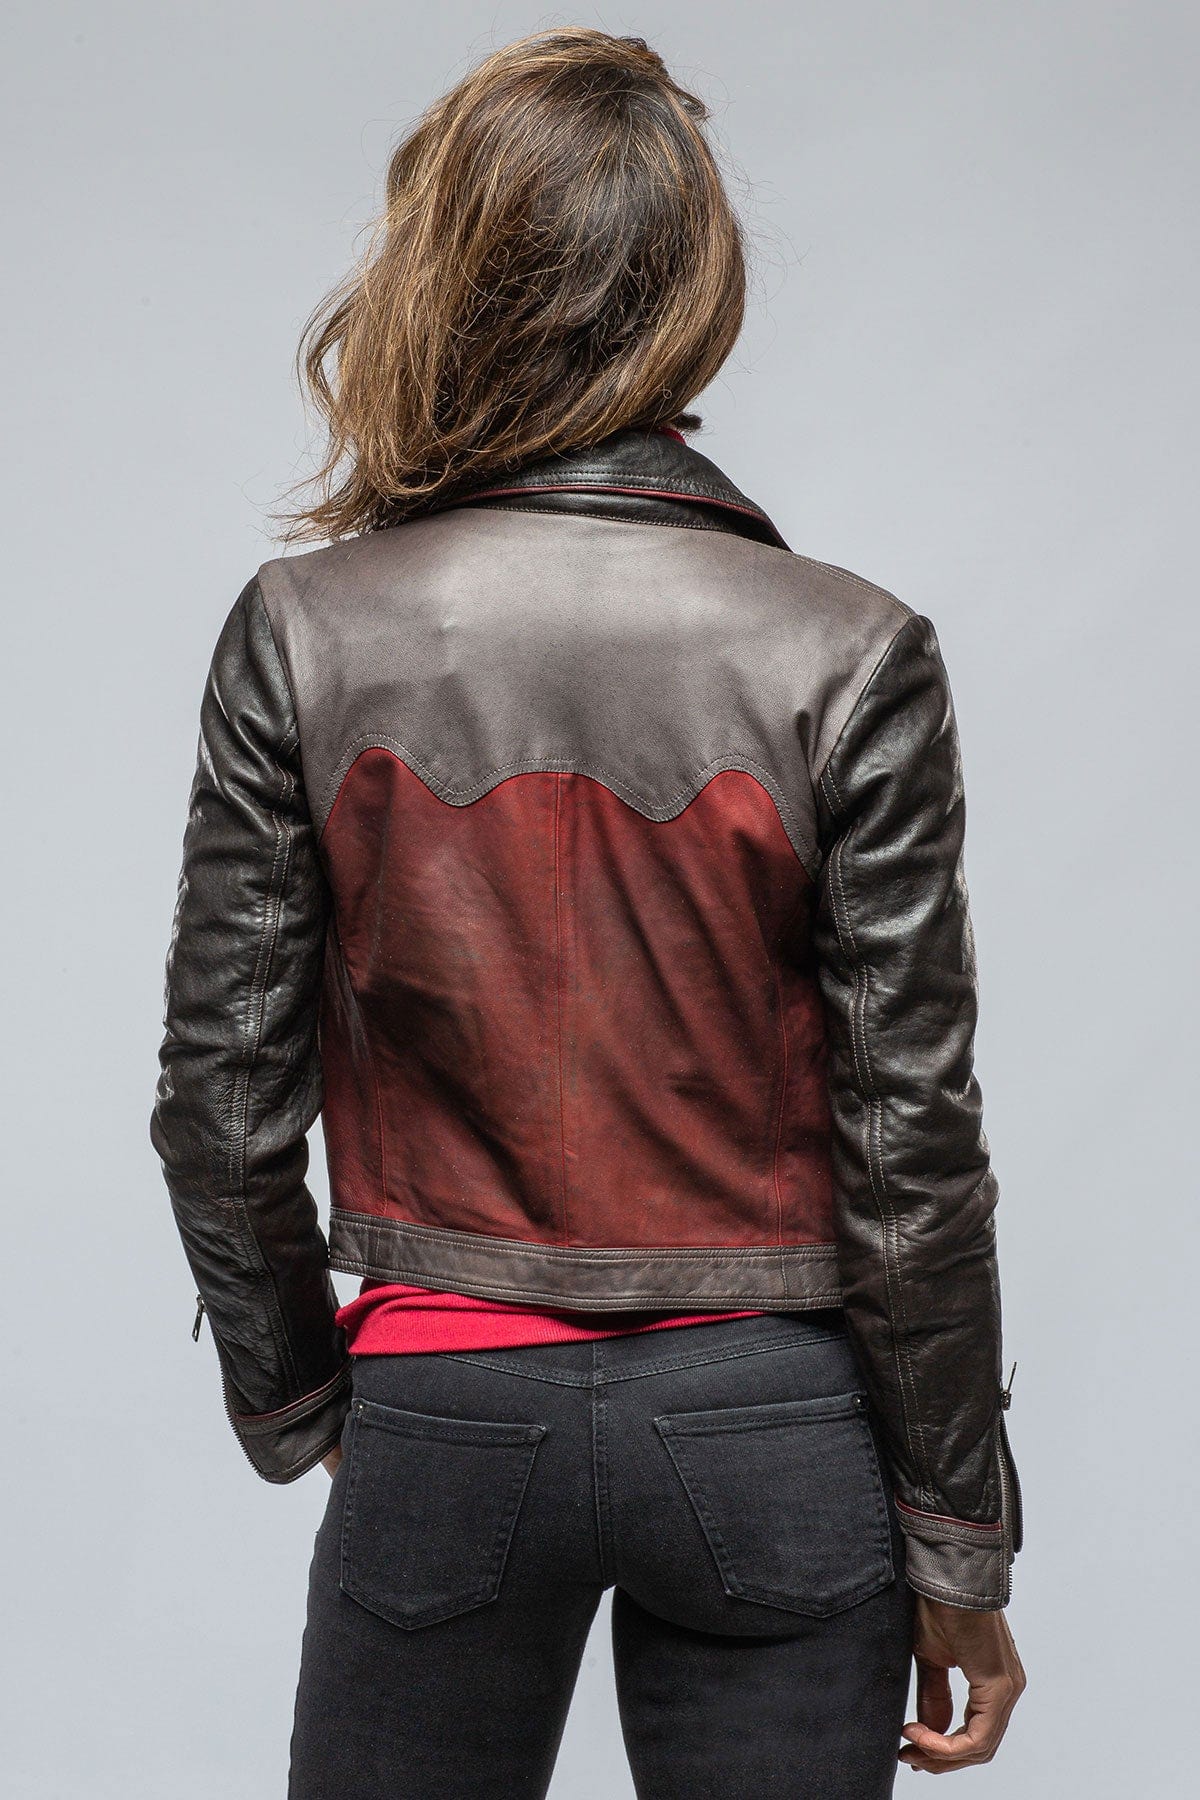 Cami Vintage Jkt In Anthracite, Terracotta, Brown - AXEL'S